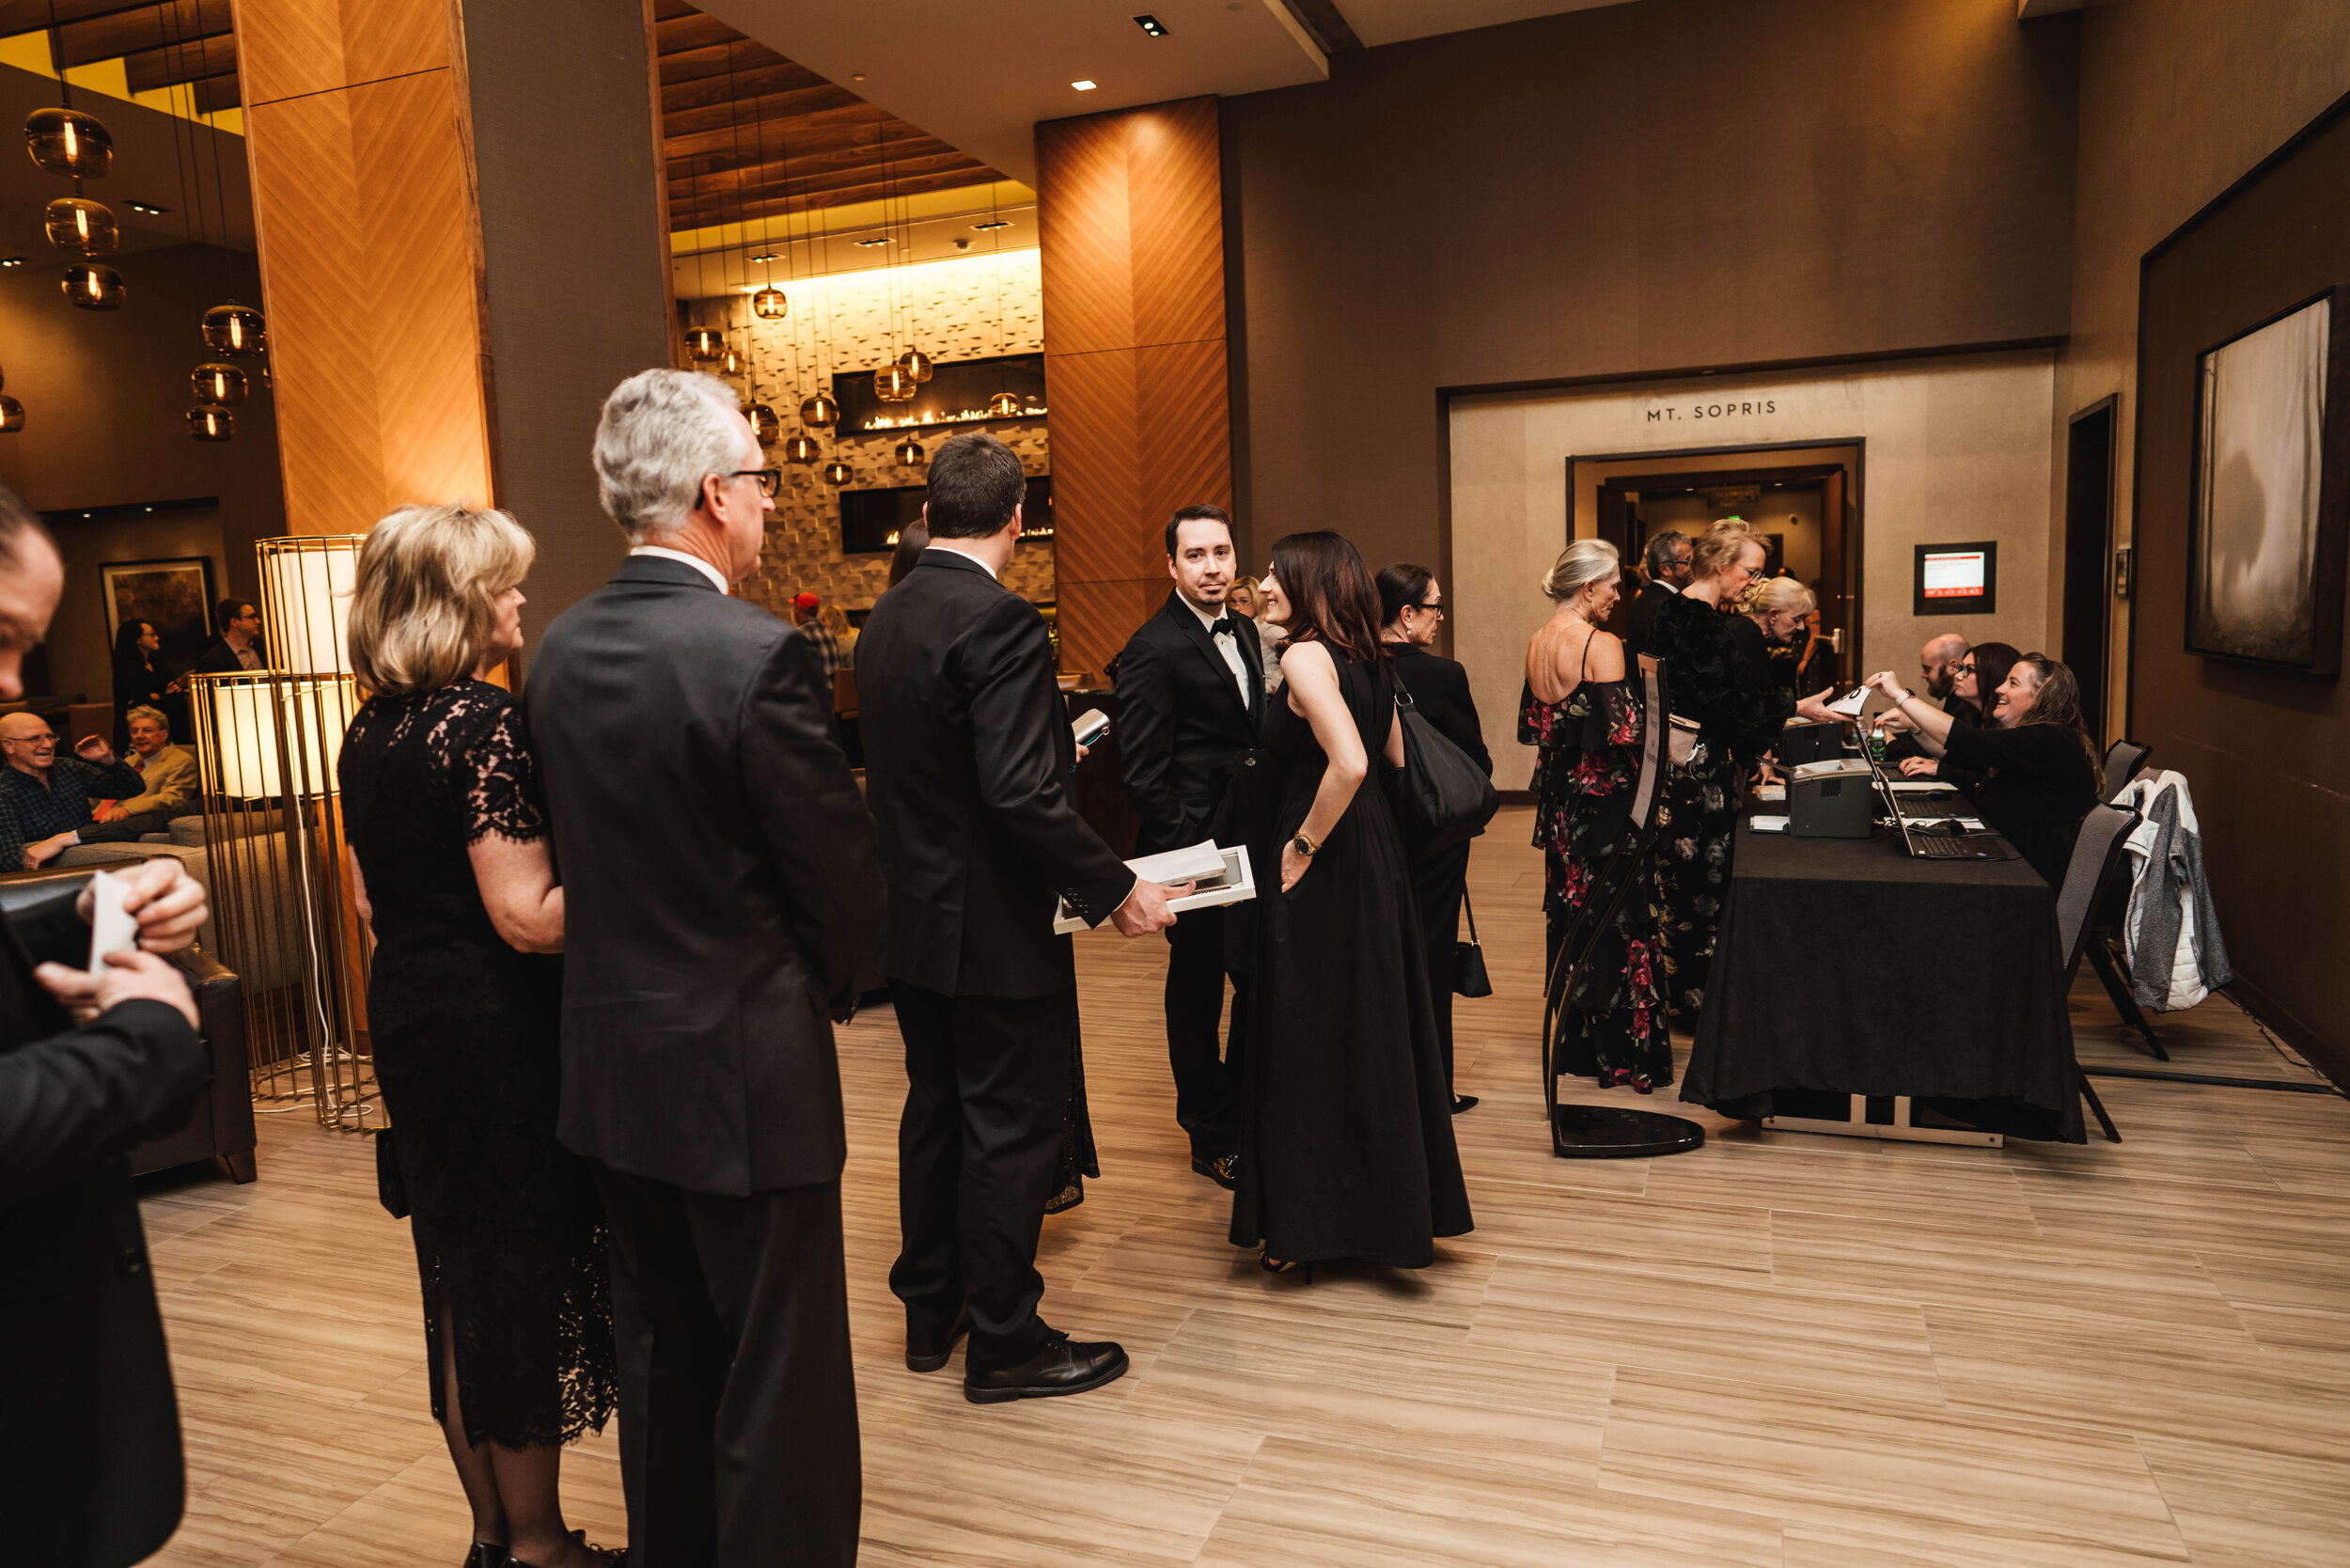 denver event photography at gaylord rockies gala black tie event - 2.jpg